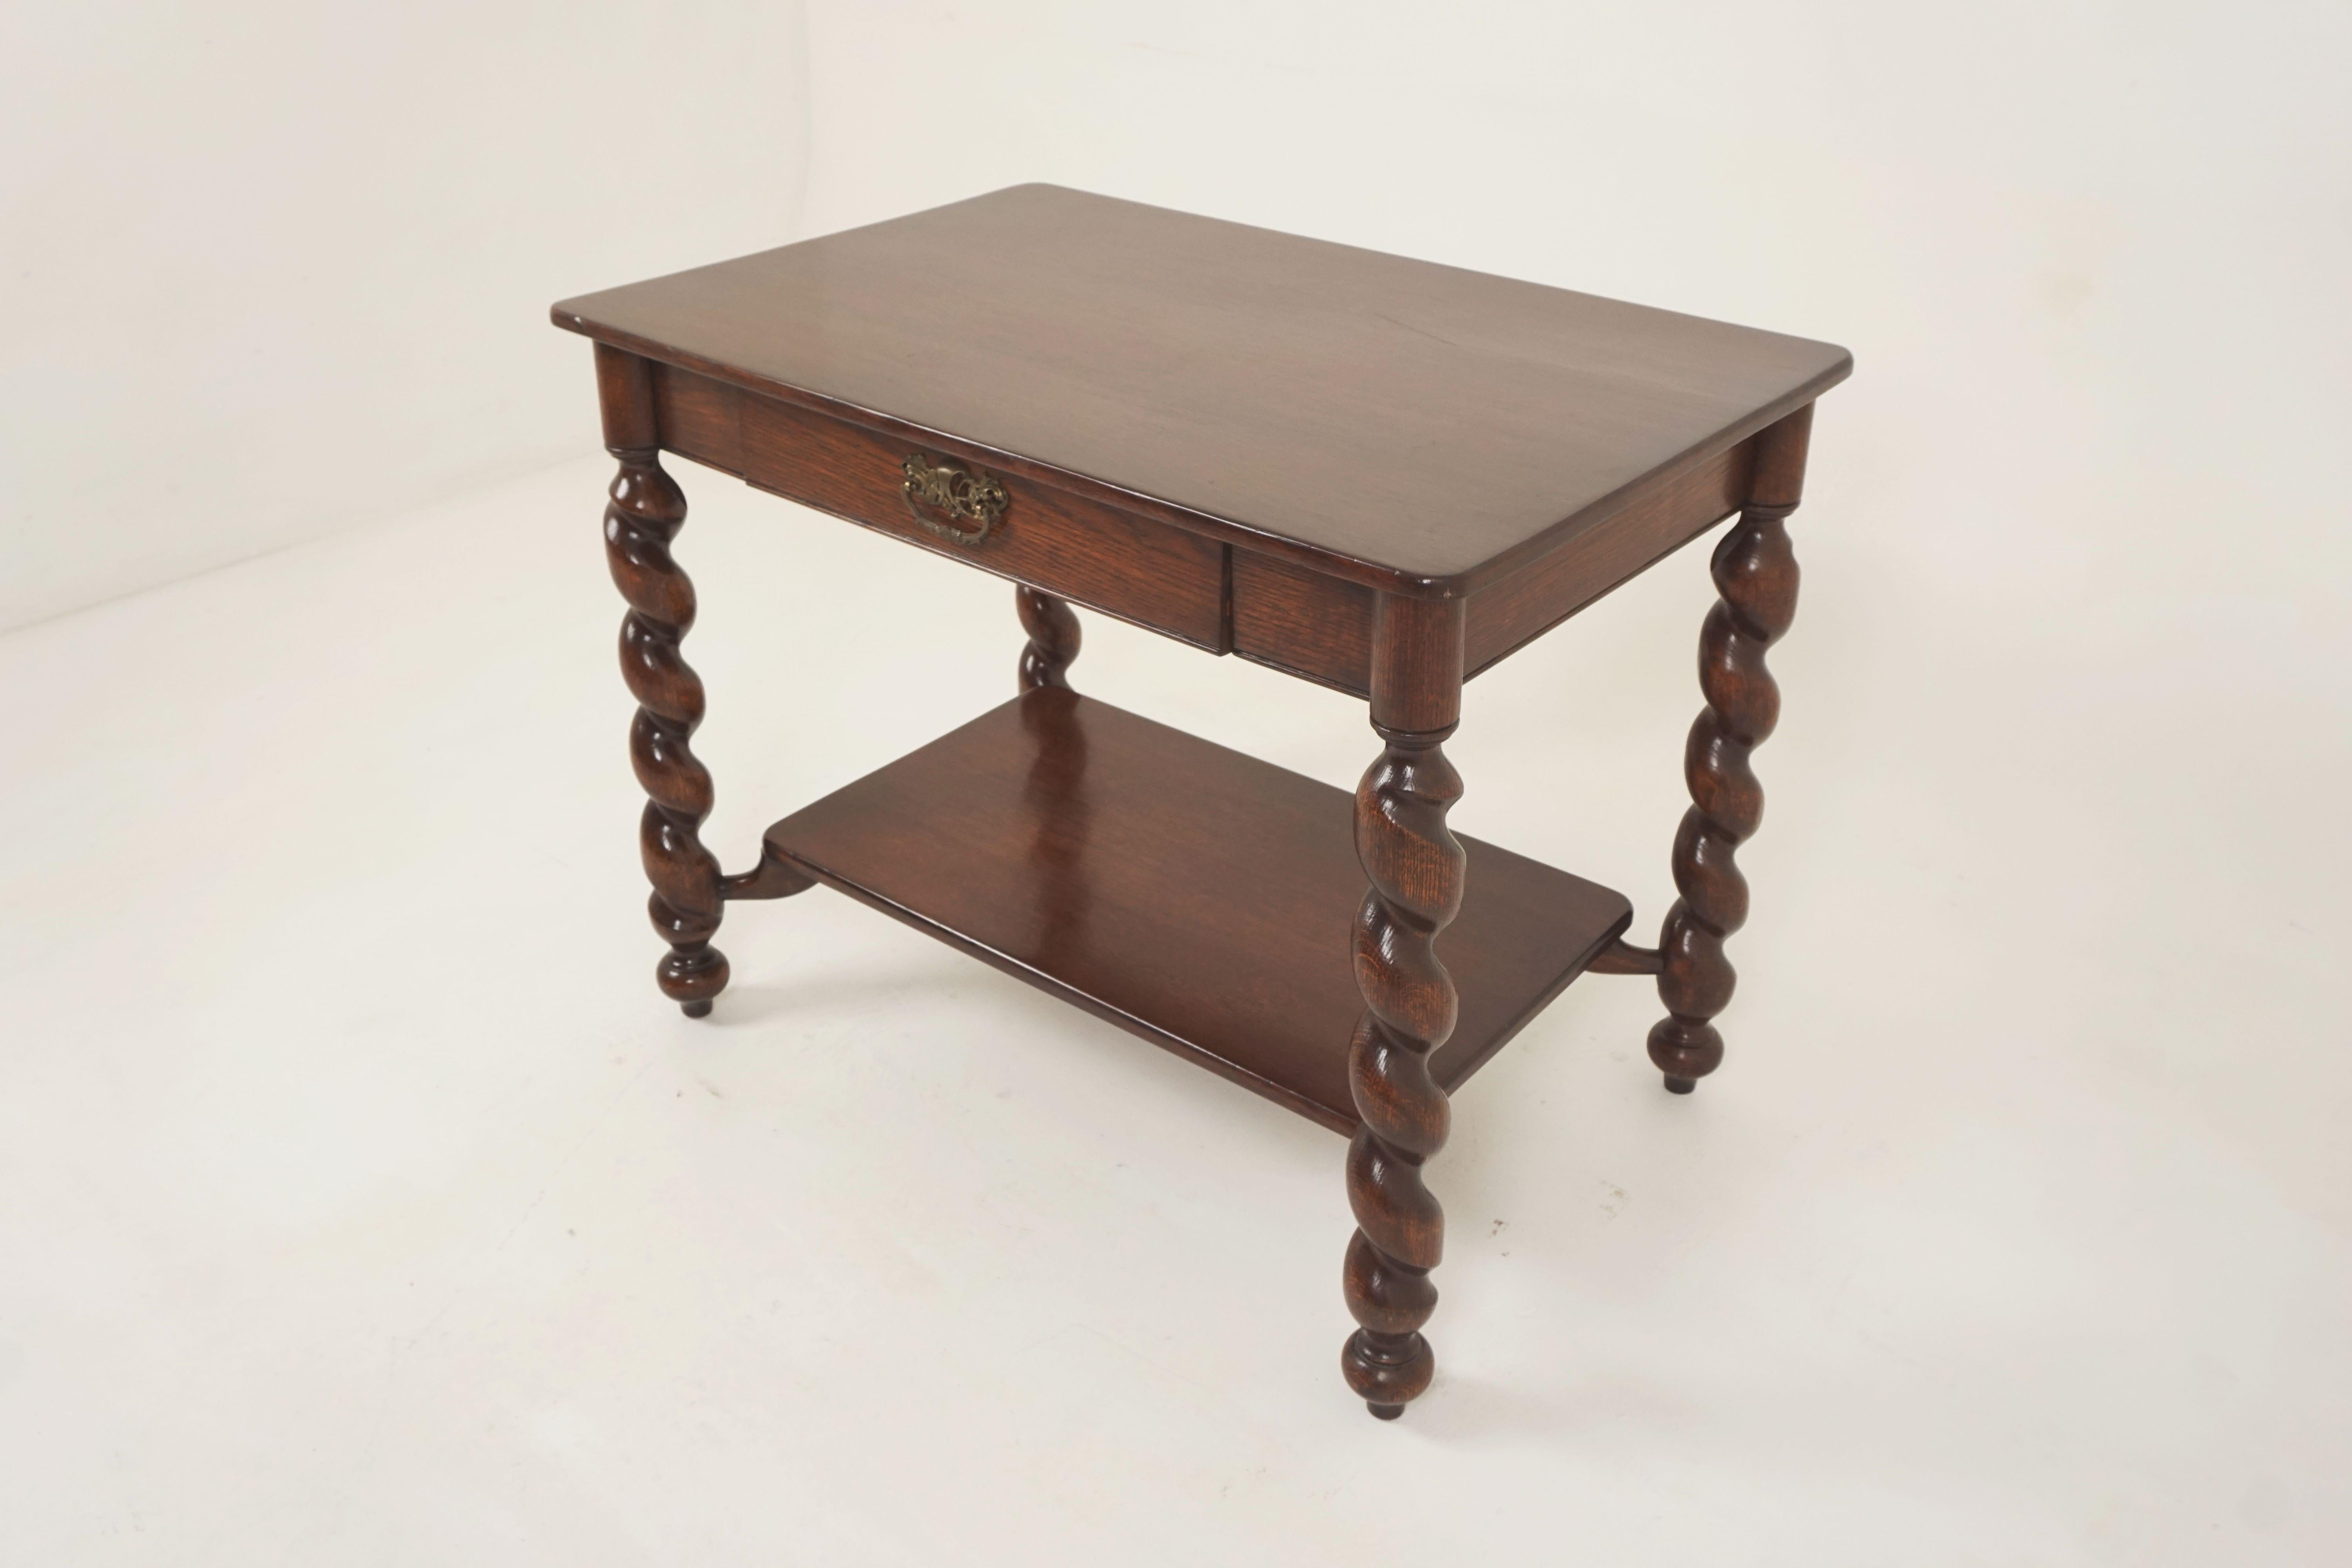 Antique writing table, oak library barley twist hall table, American 1920, B2731

American 1920
Solid oak
Table has been refinished
Rectangular top with rounded ends
Single dovetailed drawer below with original brass pulls
All standing on